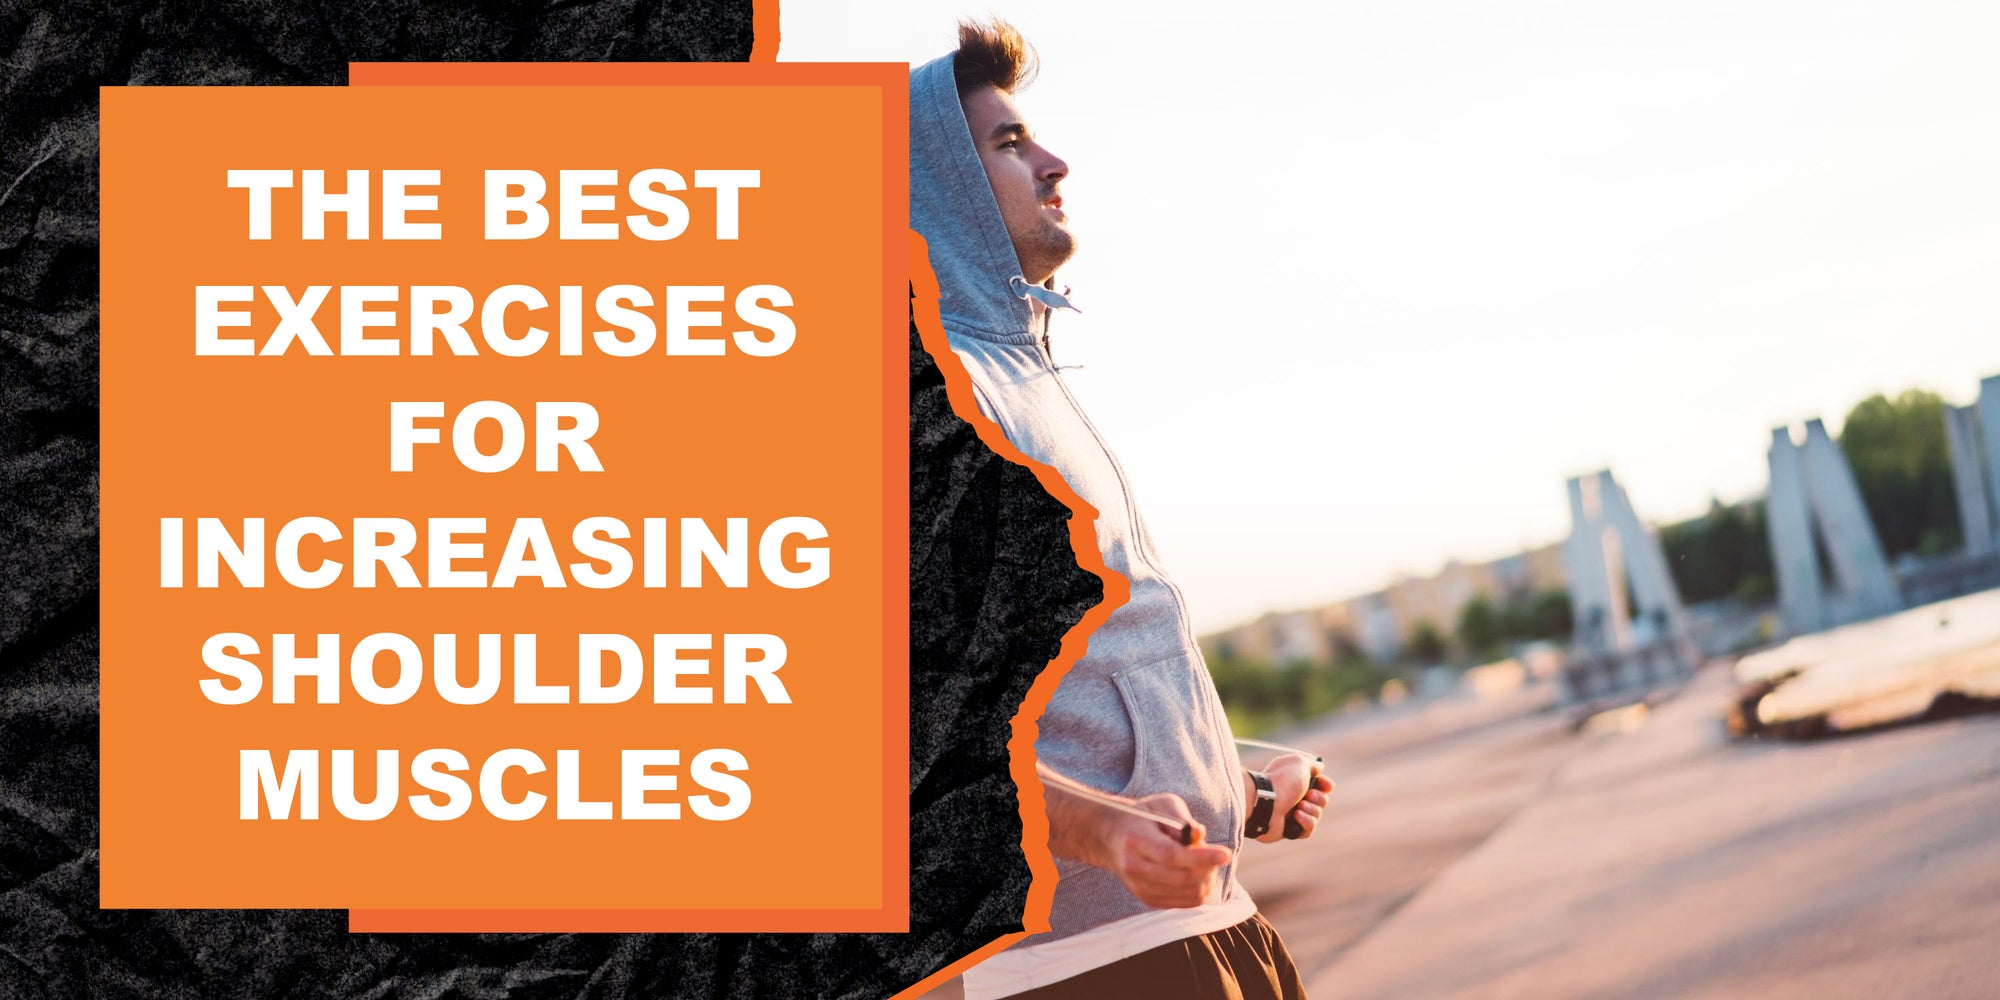 The Best Exercises for Increasing Shoulder Muscles